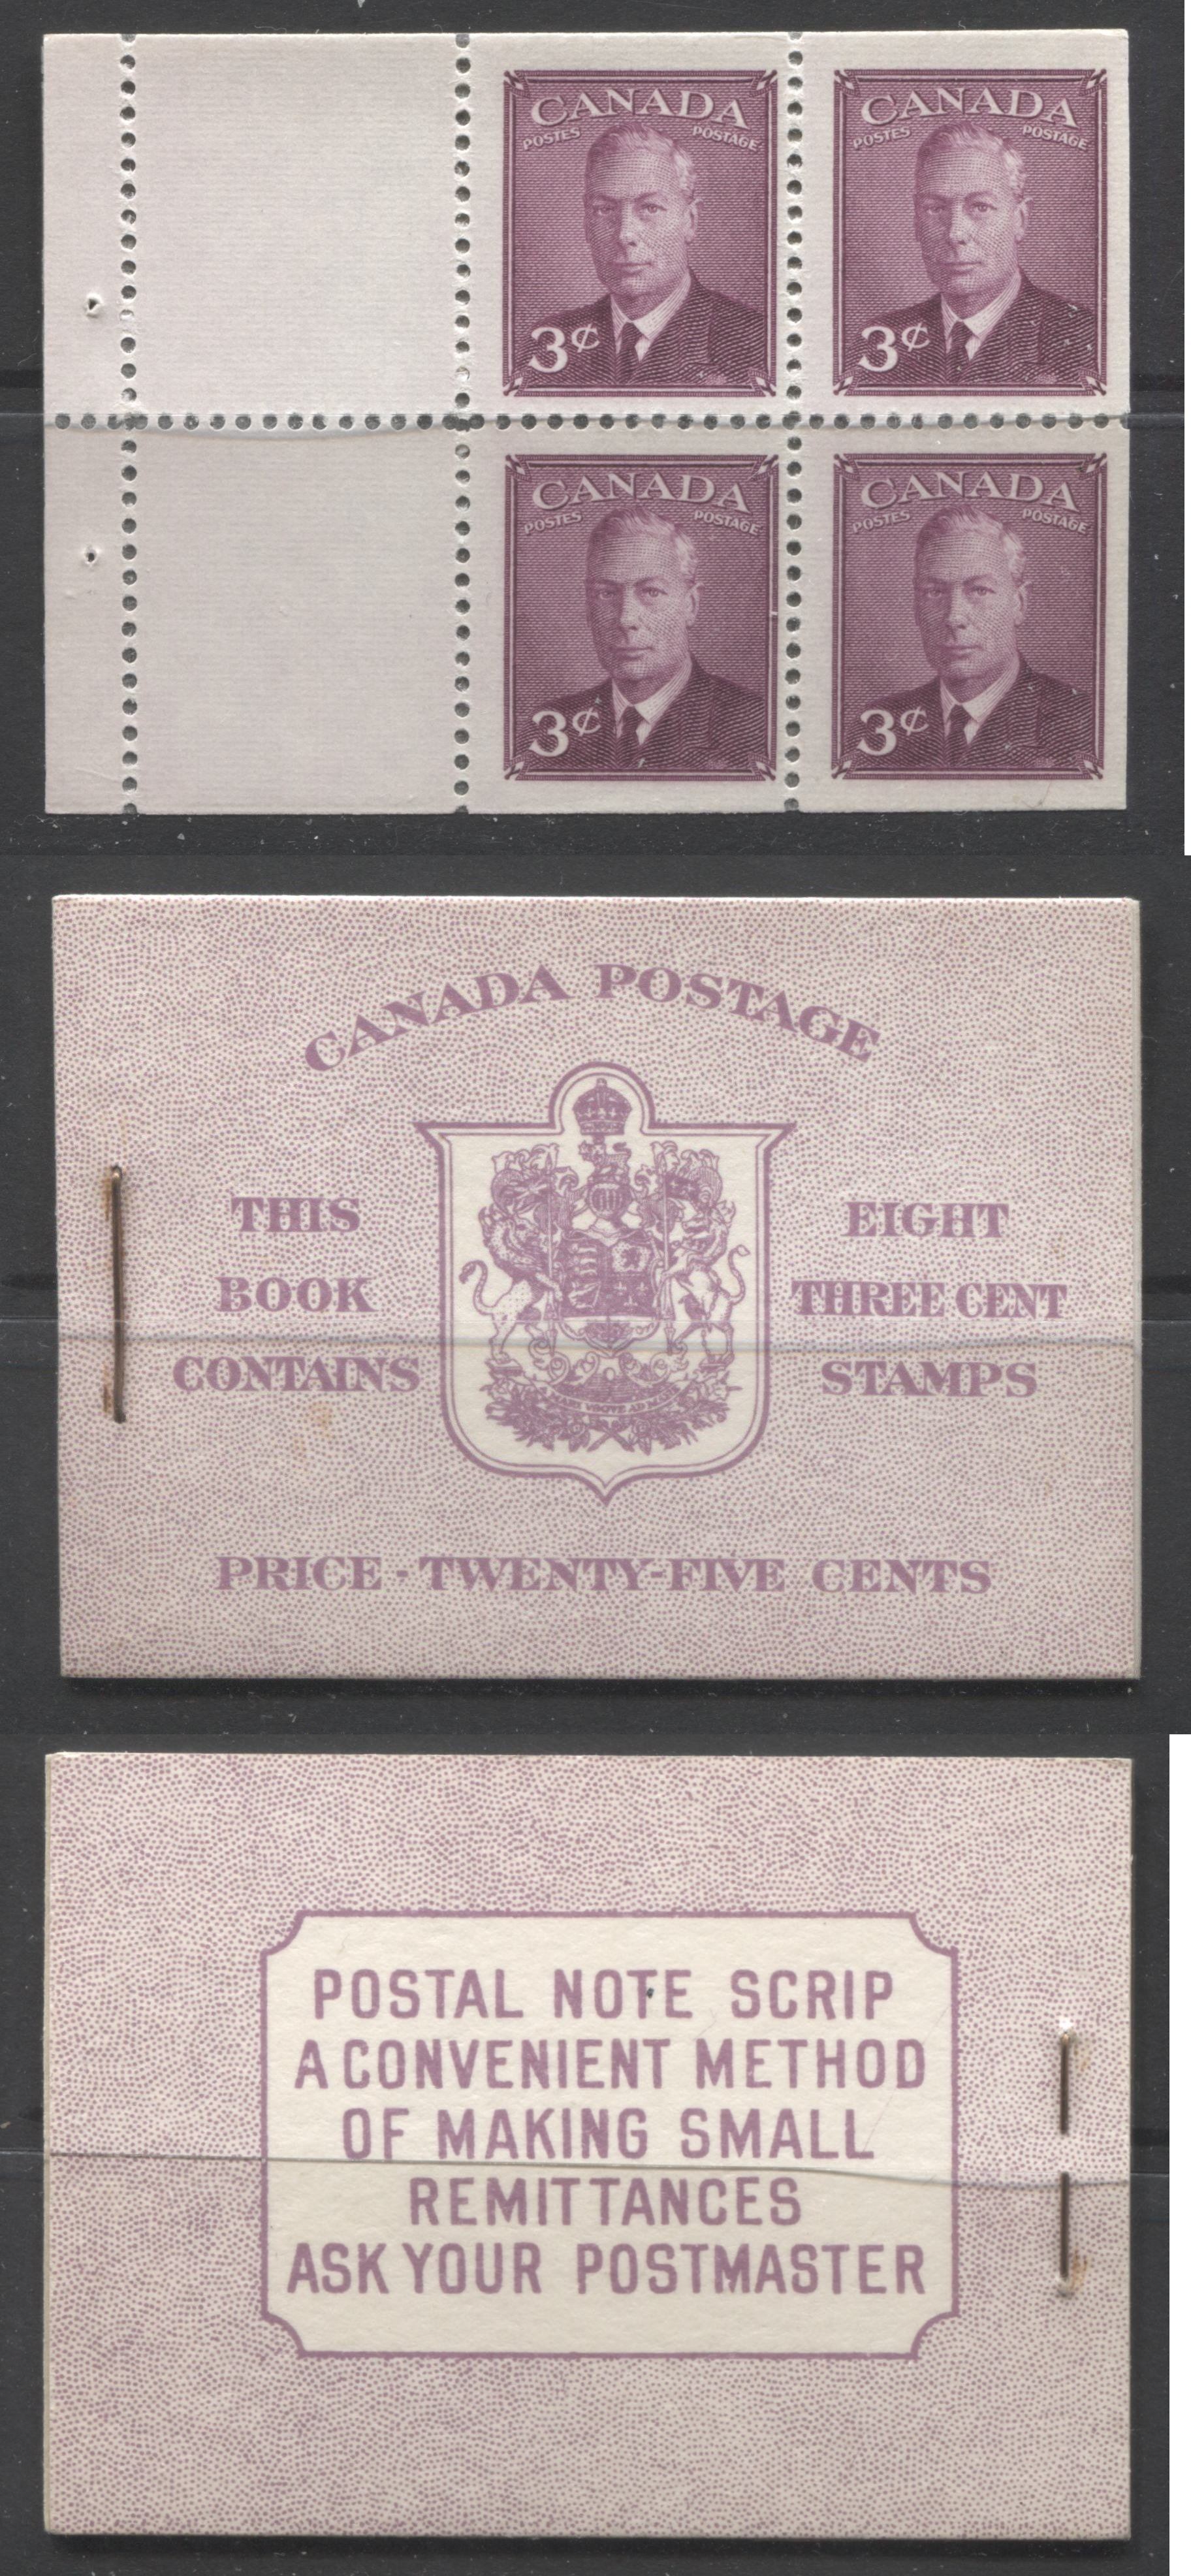 Canada #BK40a 1949-1953 Postes-Postage Issue Complete 25c English, Booklet Containing 2 Panes of the 3c Rose-Purple King George VI, Harris Front Cover Type IIf, Back Cover Caiv, 7c & 5c Rate Page Brixton Chrome 